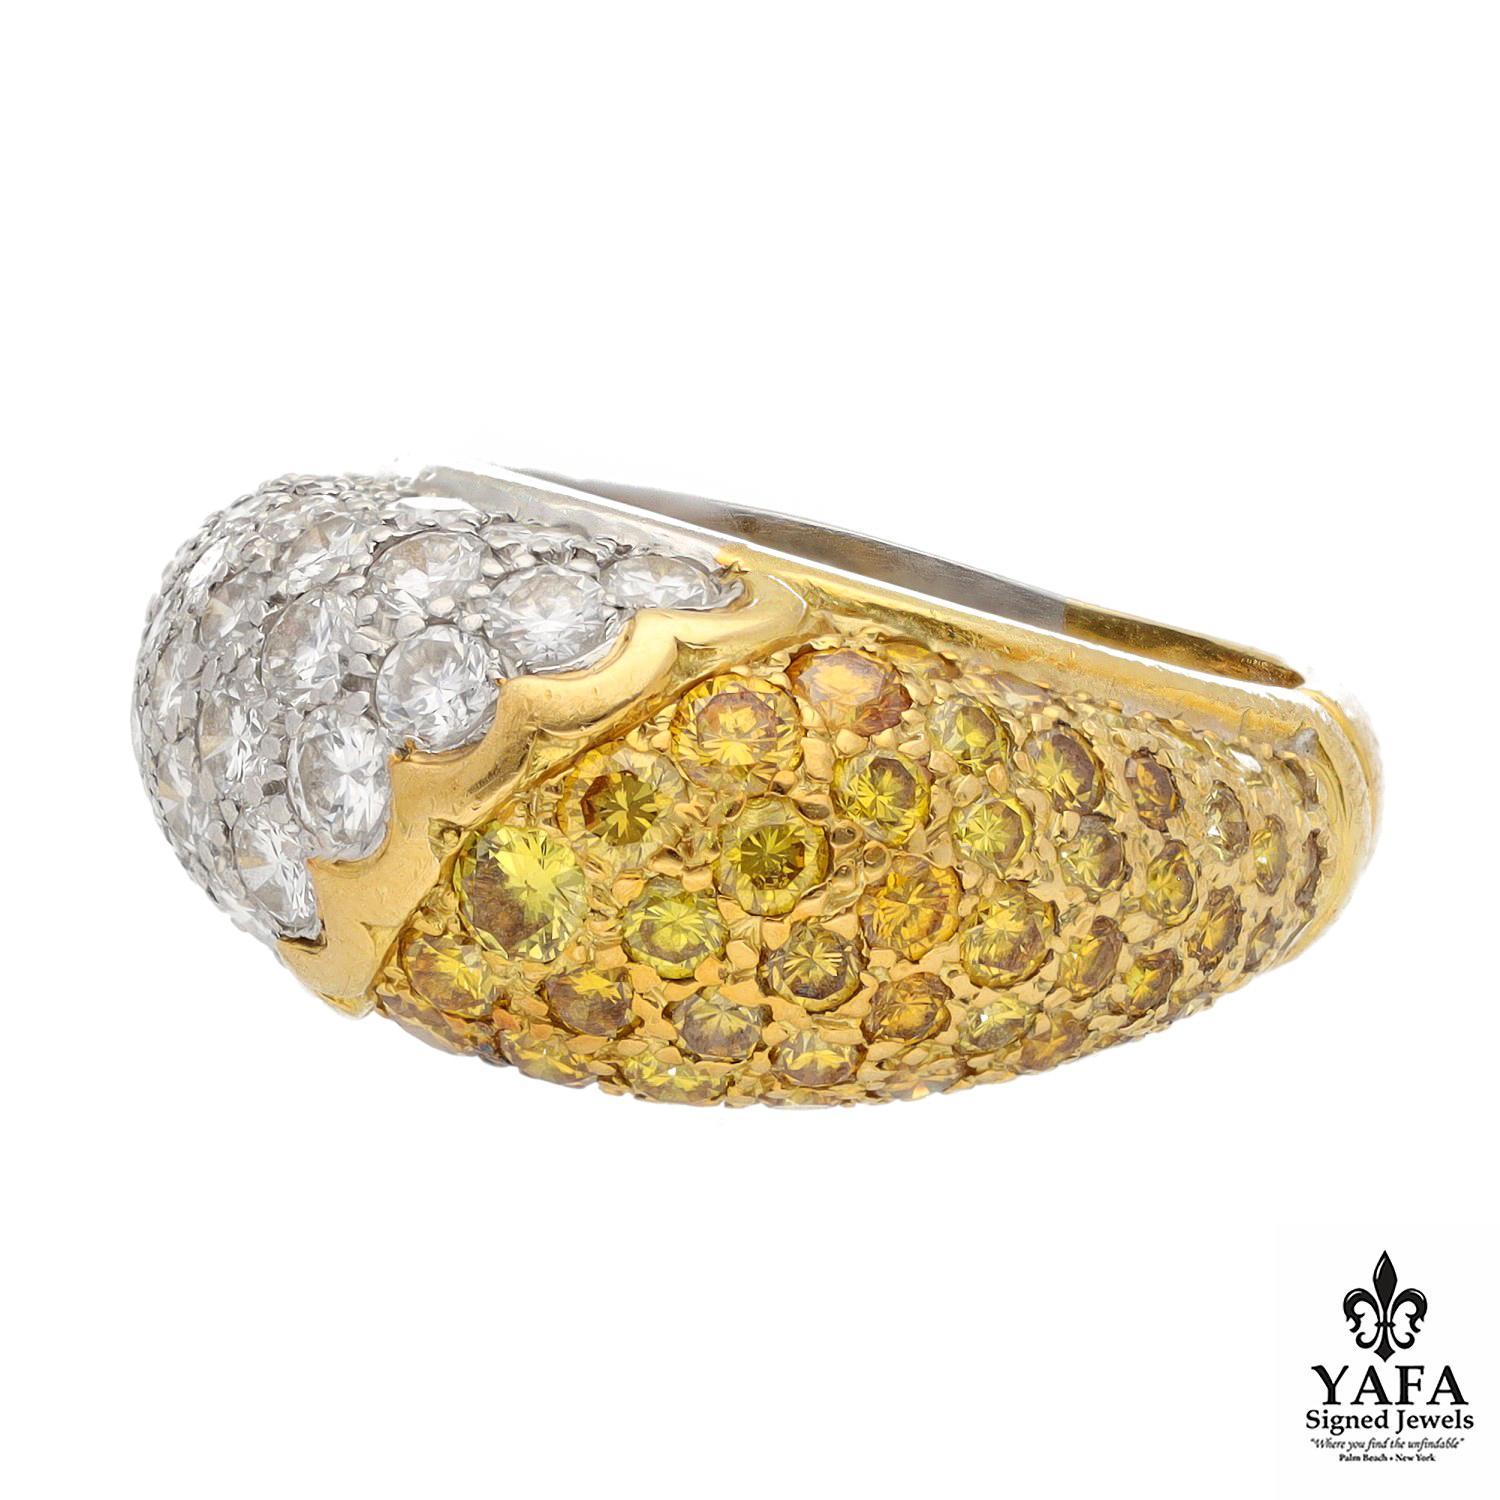 Fancy Yellow and White Diamonds Each Take Center Stage in this Bombe Style Ring. The Unique Split Metal Shank is in Platinum and 18K Yellow Gold.

Signed - Van Cleef & Arpels NY